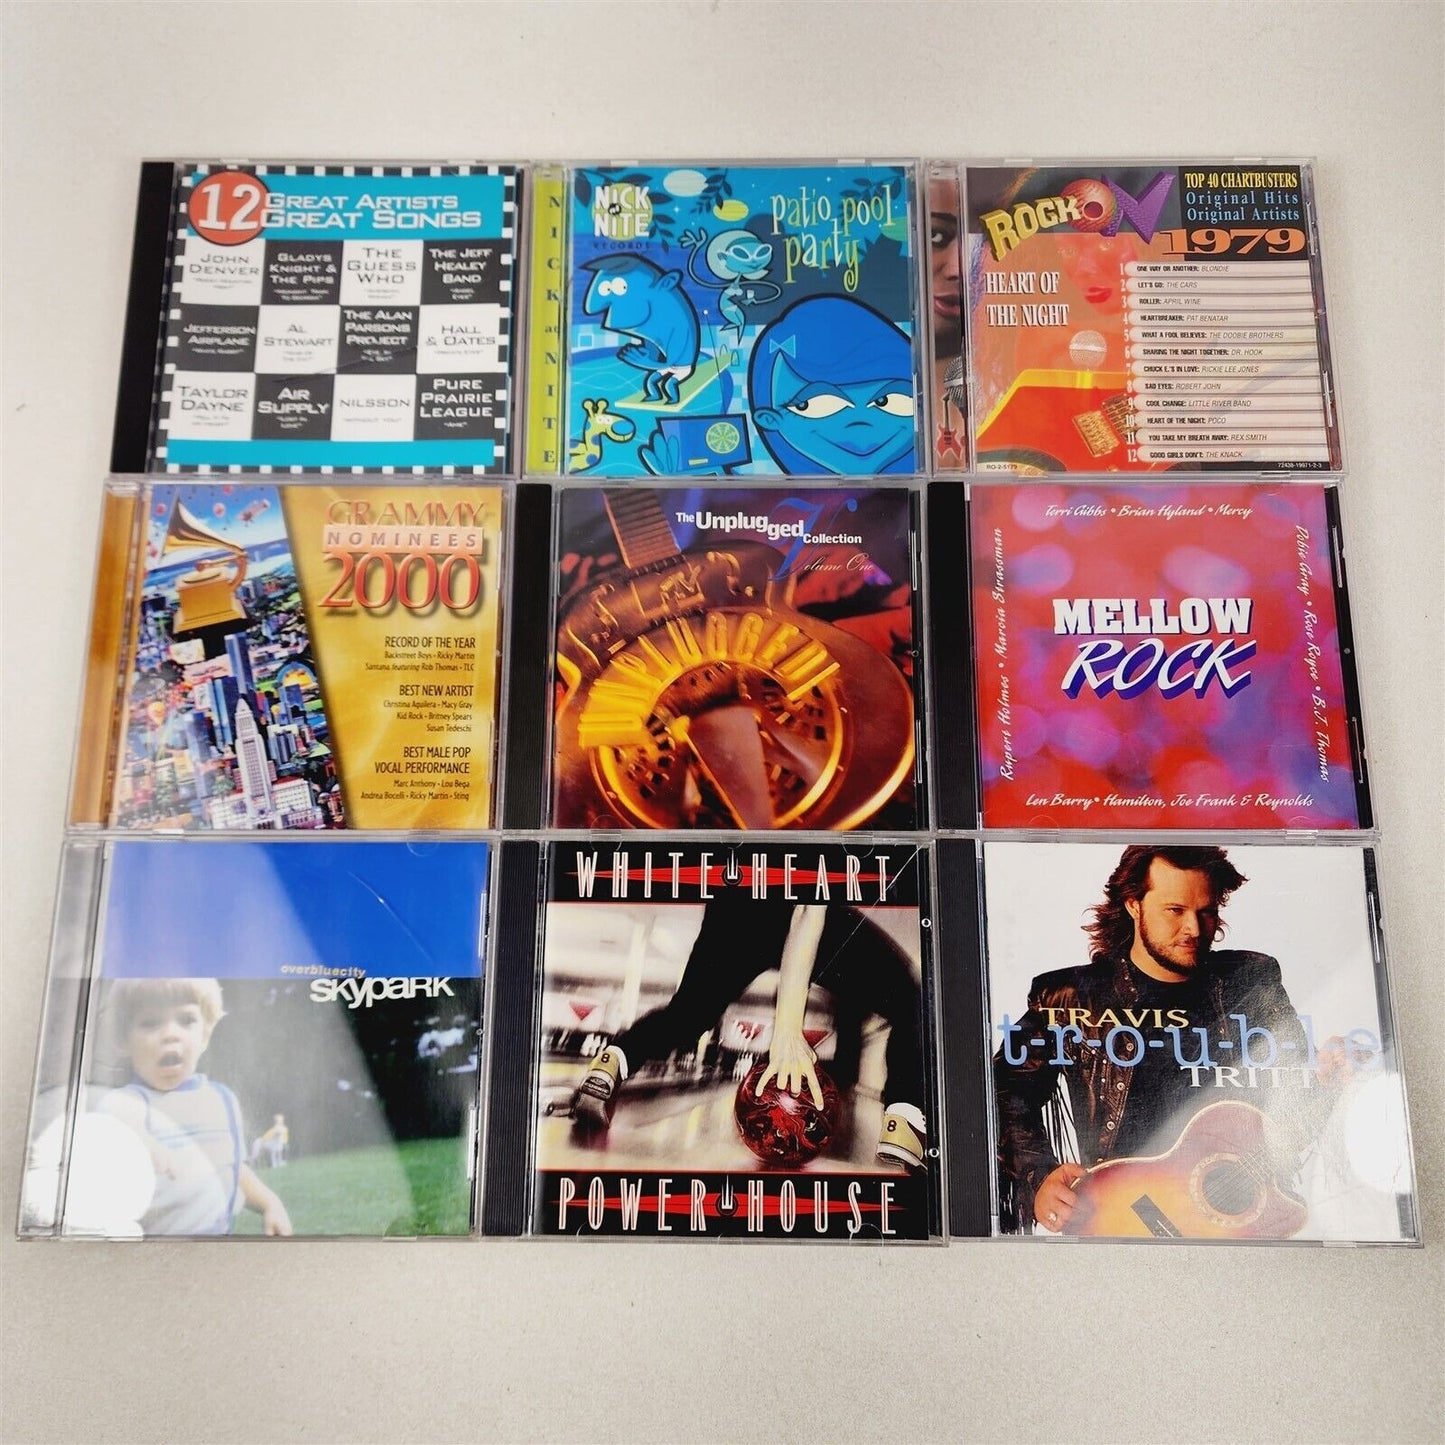 Lot of 78 Mixed CDs Rock Alternative Country Misc Pop Classical